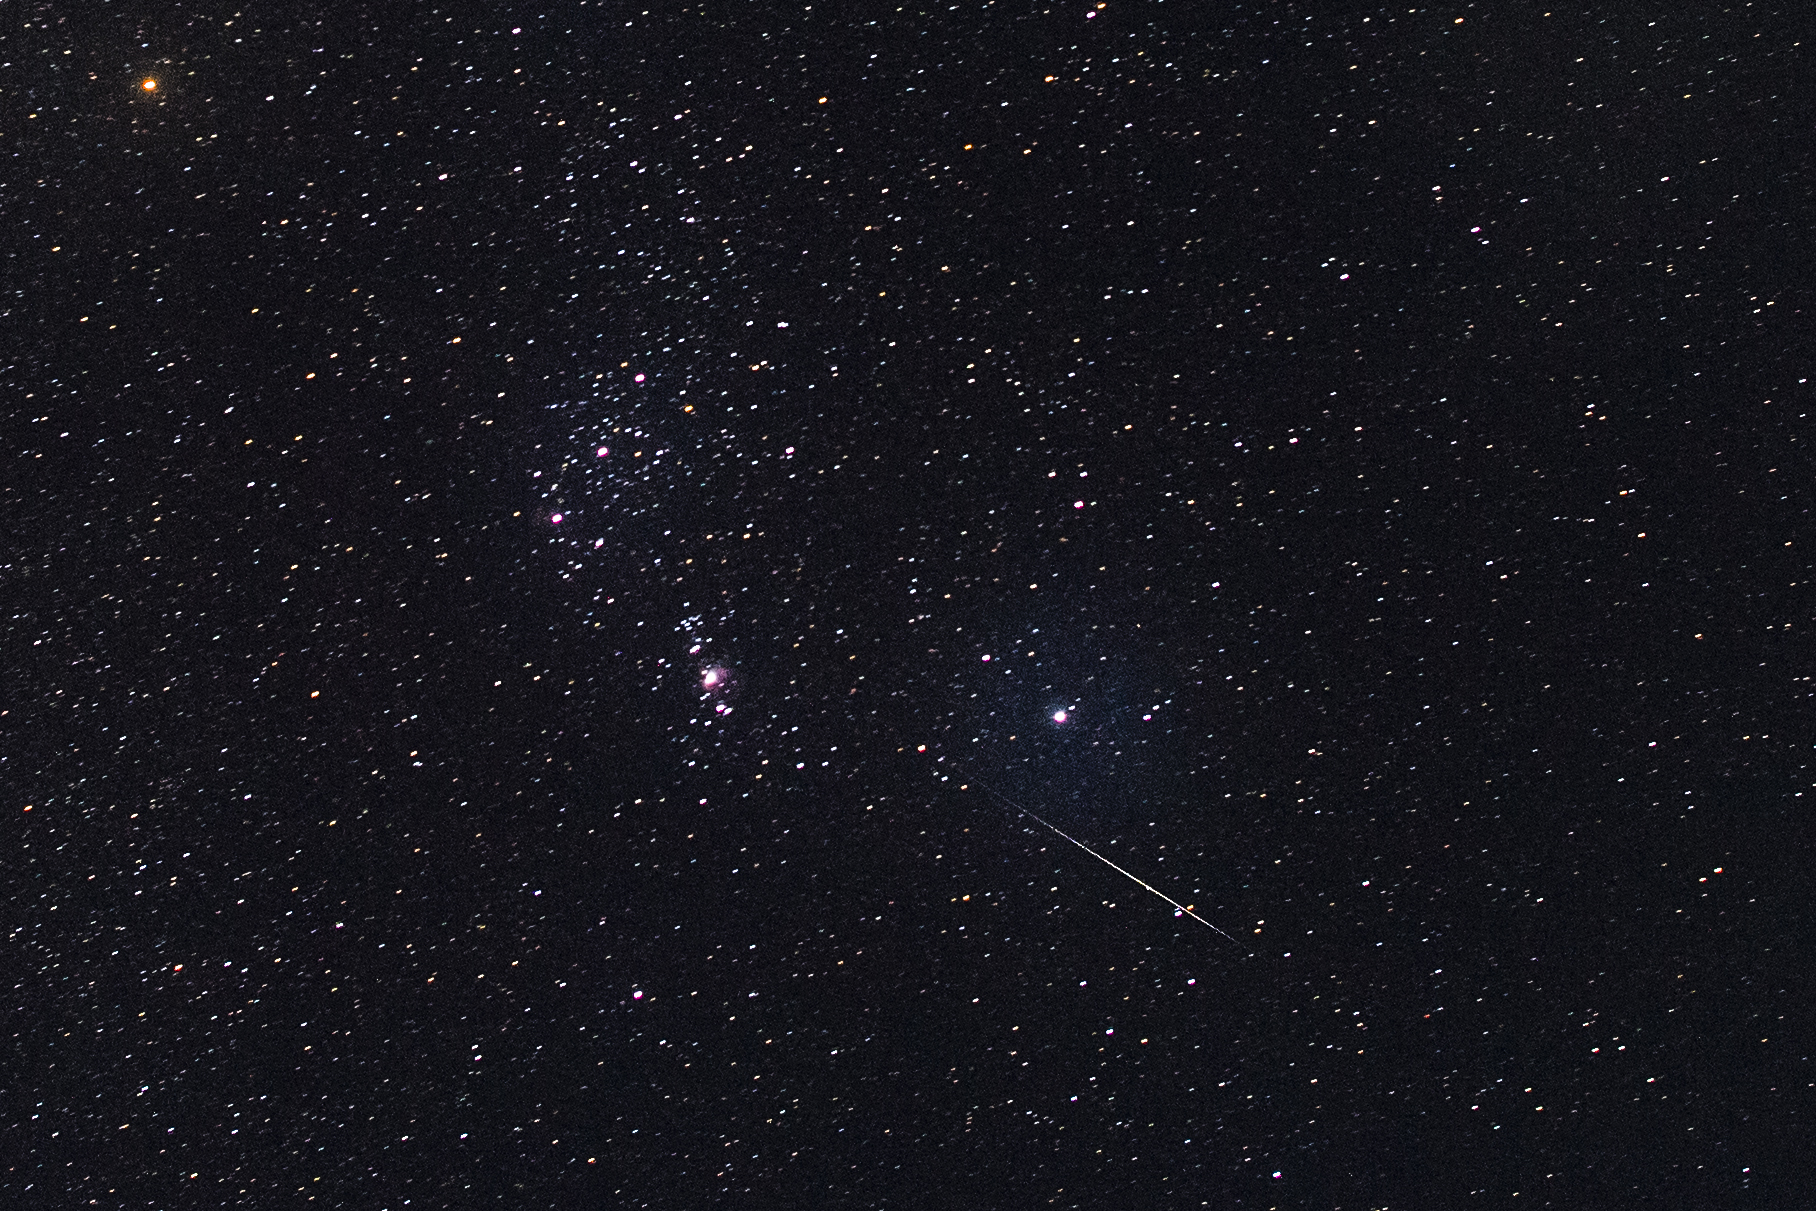 Aquariid Southern Delta Meteor Shower How to Watch the Spectacular